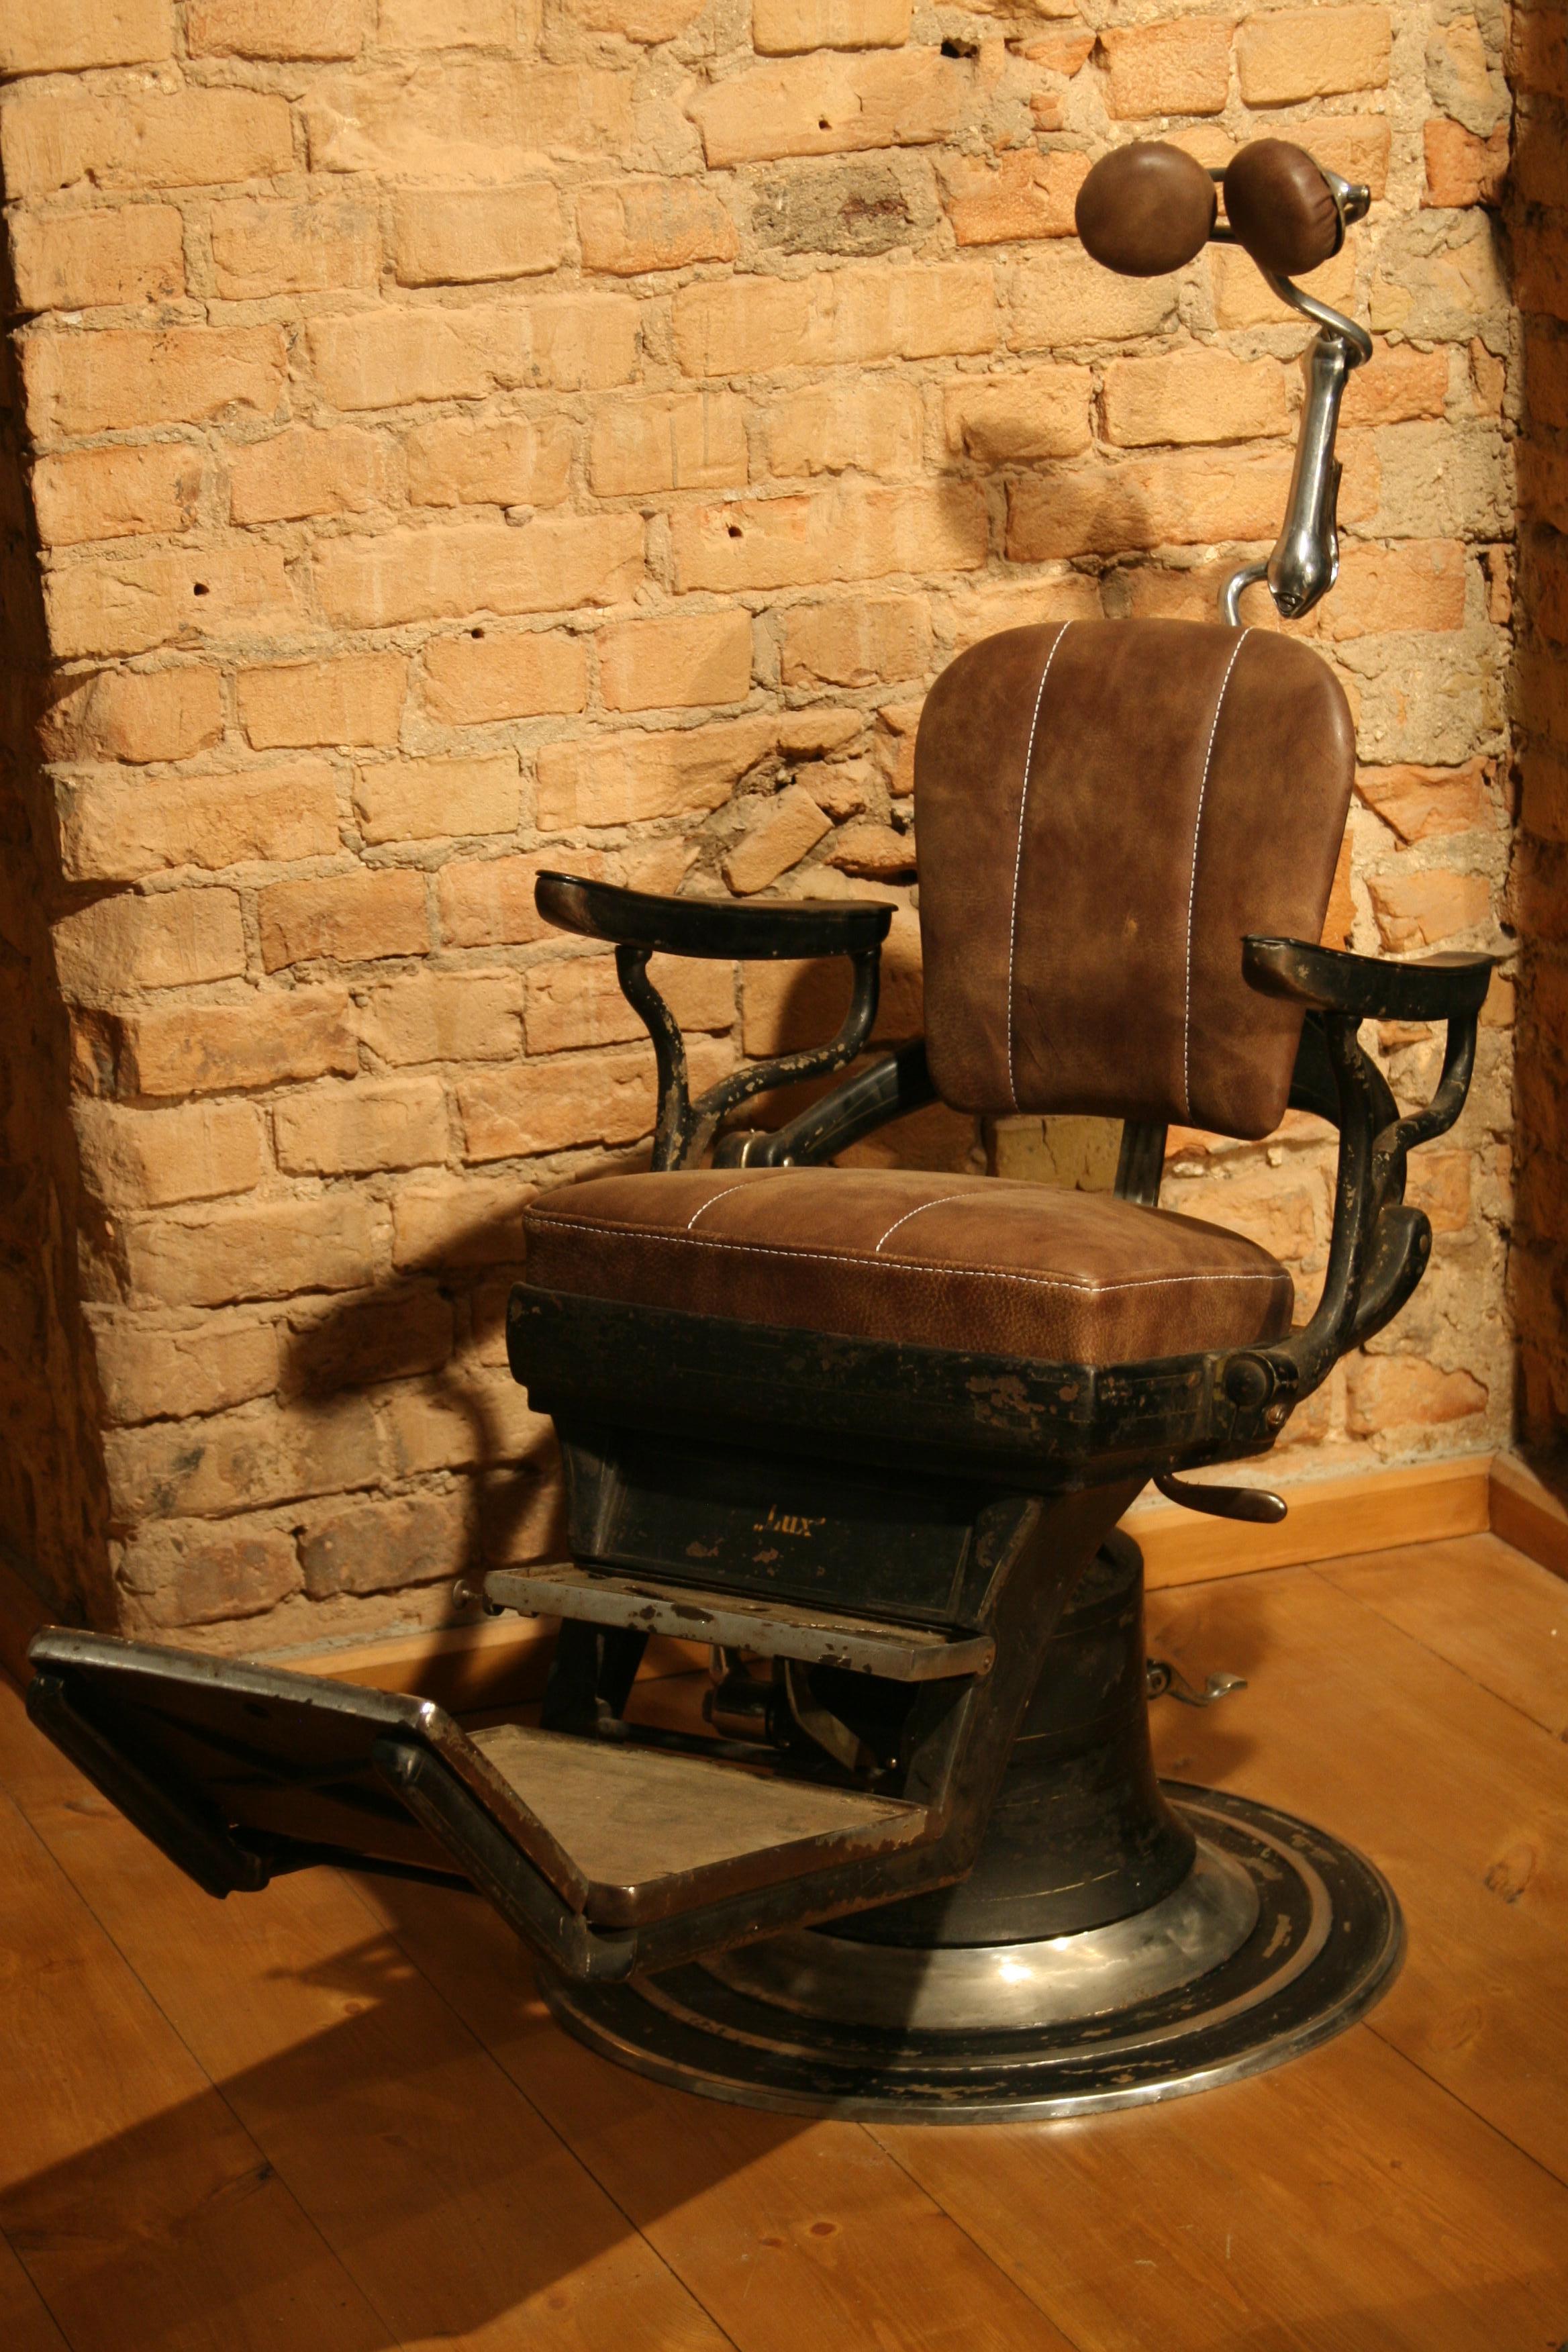 The original Polish dental chair manufactured in the 1930s by the company Dentalia located in Lodz.
Dental chair after complete service of the hydraulic system, new seat cover, backrest and head rest made of premium Italian natural leather.